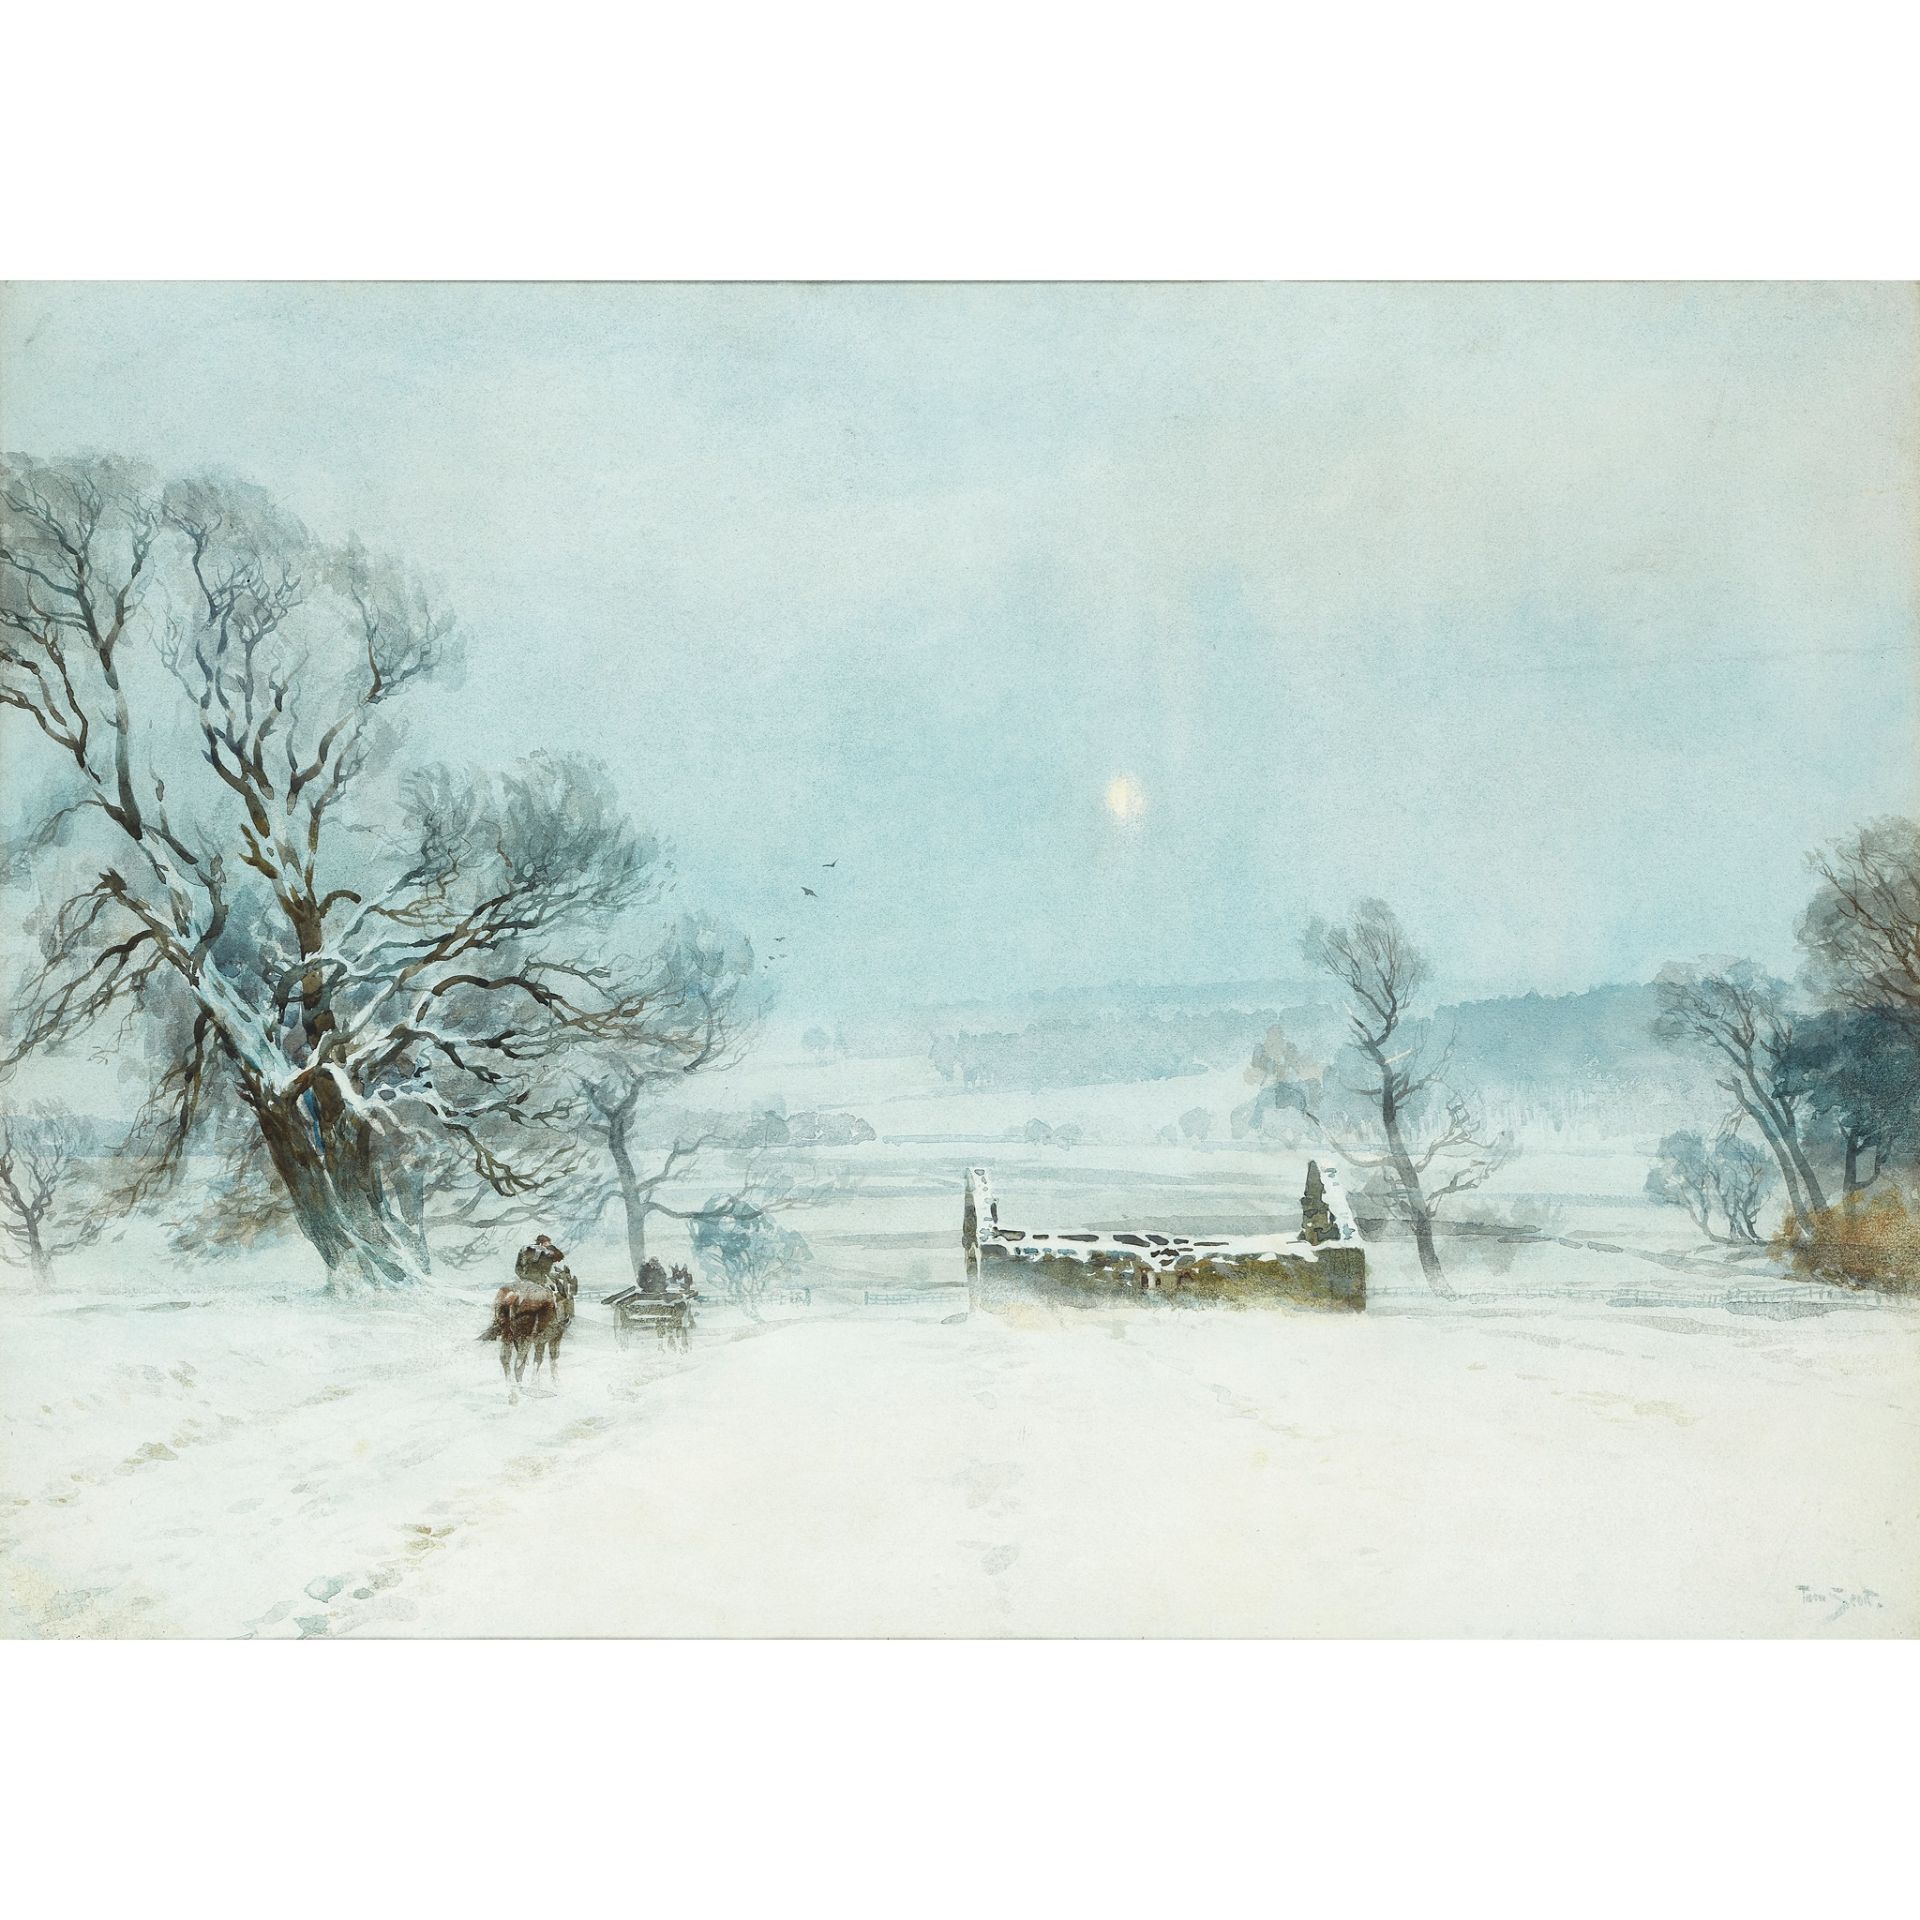 TOM SCOTT R.S.A., R.S.W (SCOTTISH 1859-1927) SNOW STORM IN THE HAINING, SELKIRK